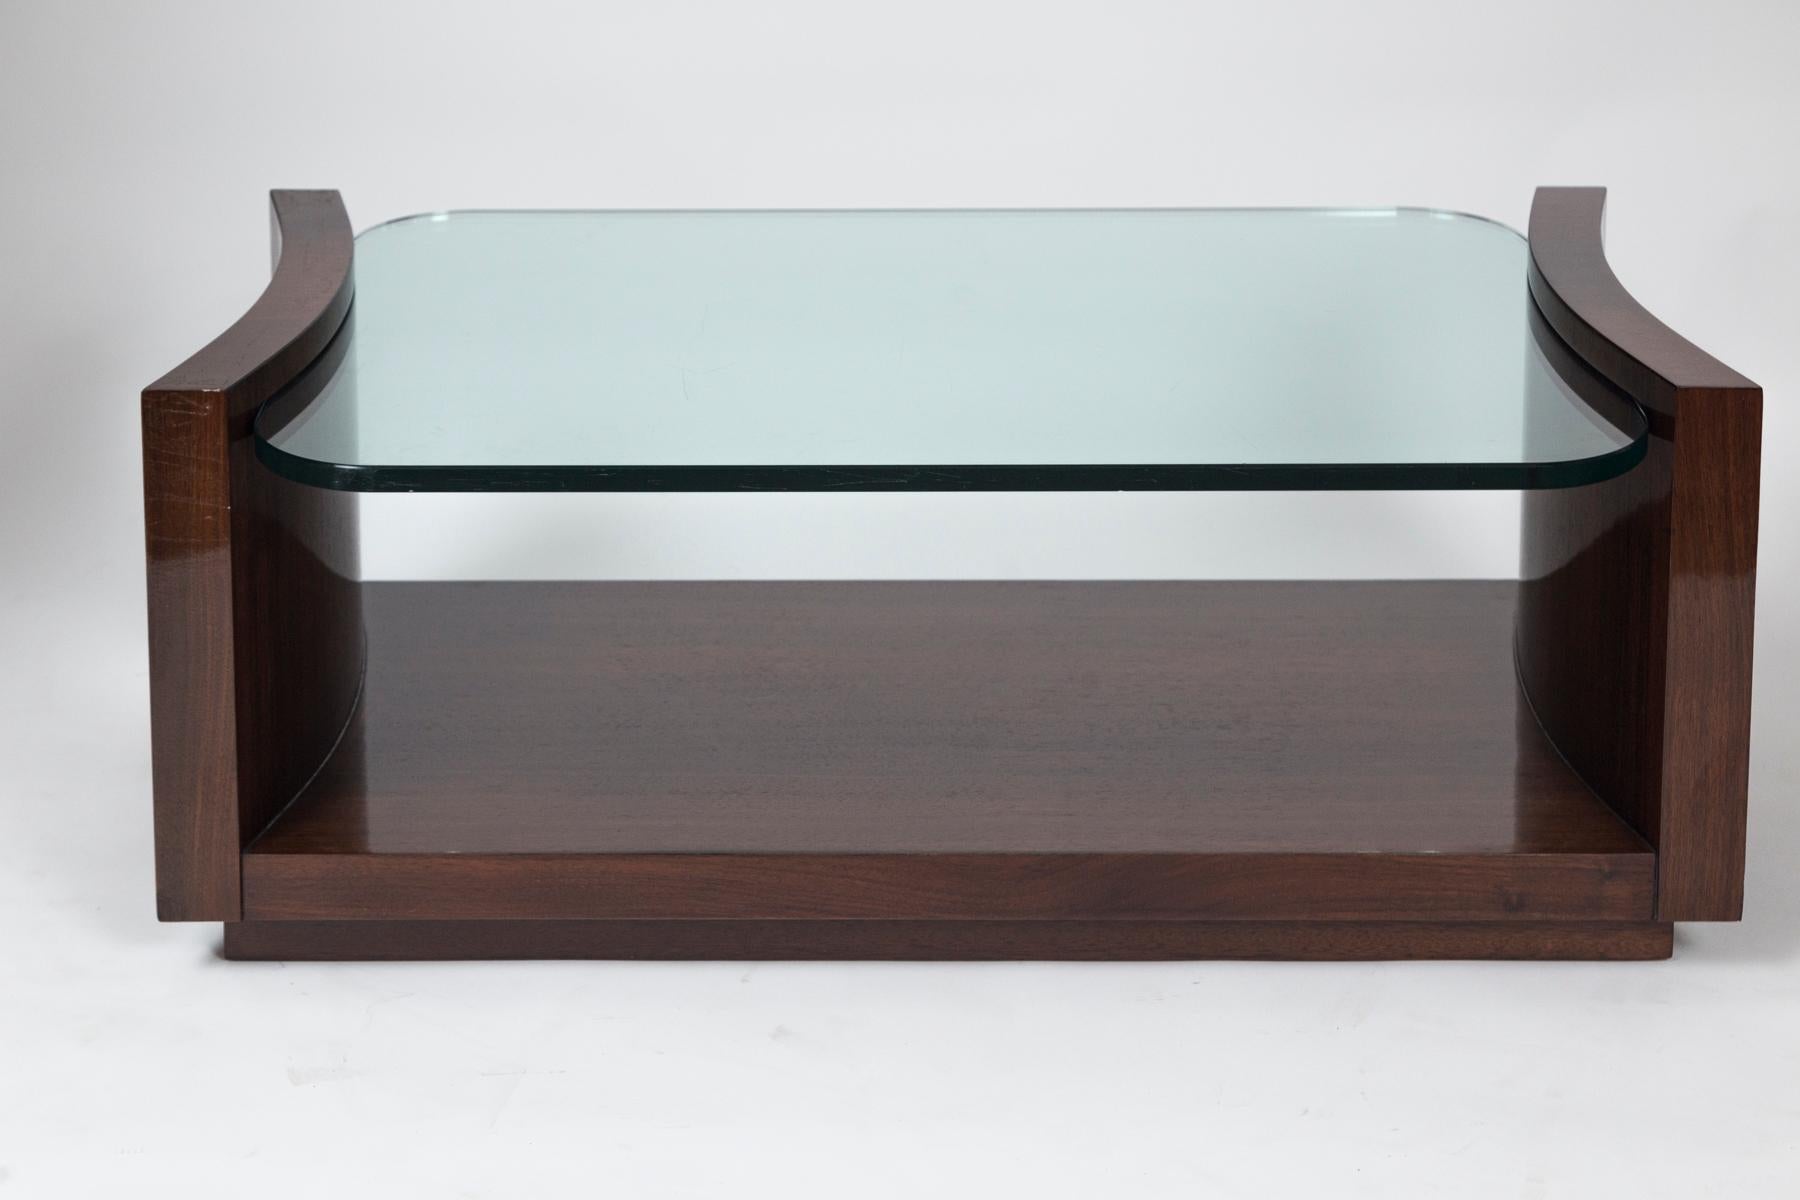 Wonderful sleek incurved low two-tiered table with thick floating glass top suspended by a beautiful rosewood veneer base 

Origin: France

Dating: 1930ca

Dimensions: 46? long, 24? wide, 18? high.